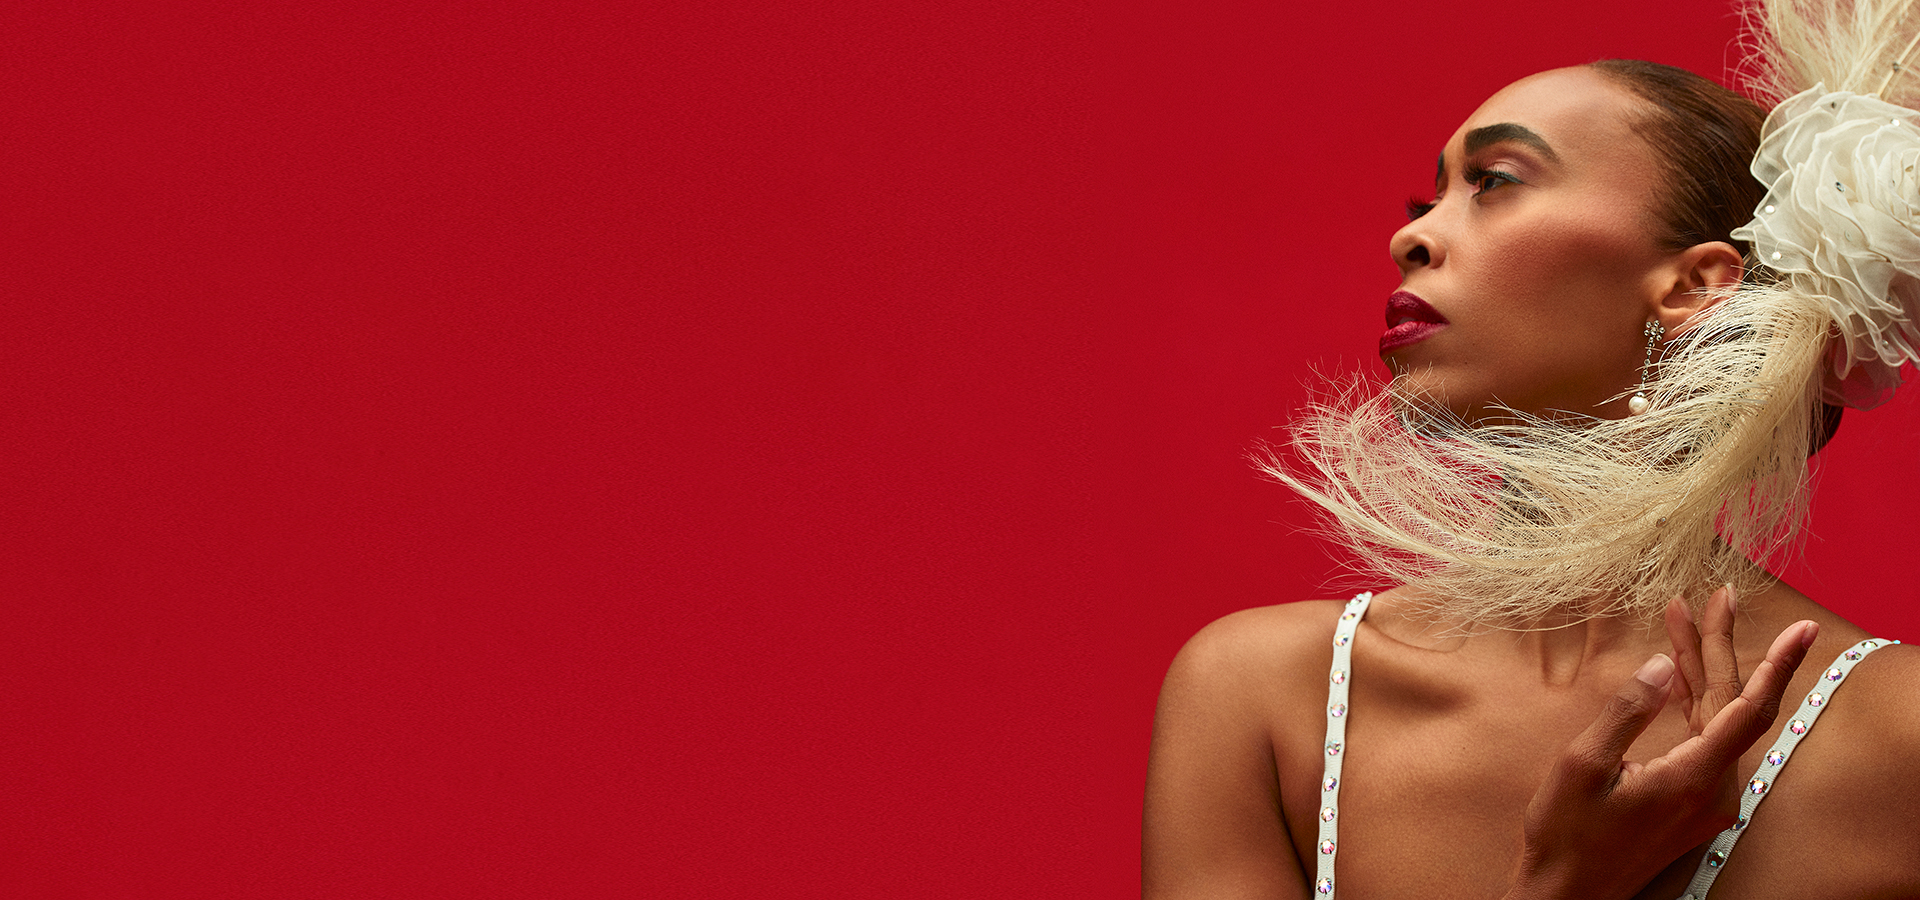 An Alvin Ailey American Dance Theater performer looking to the right, with a large feathered headpiece in her hair, standing against a bright red backdrop.